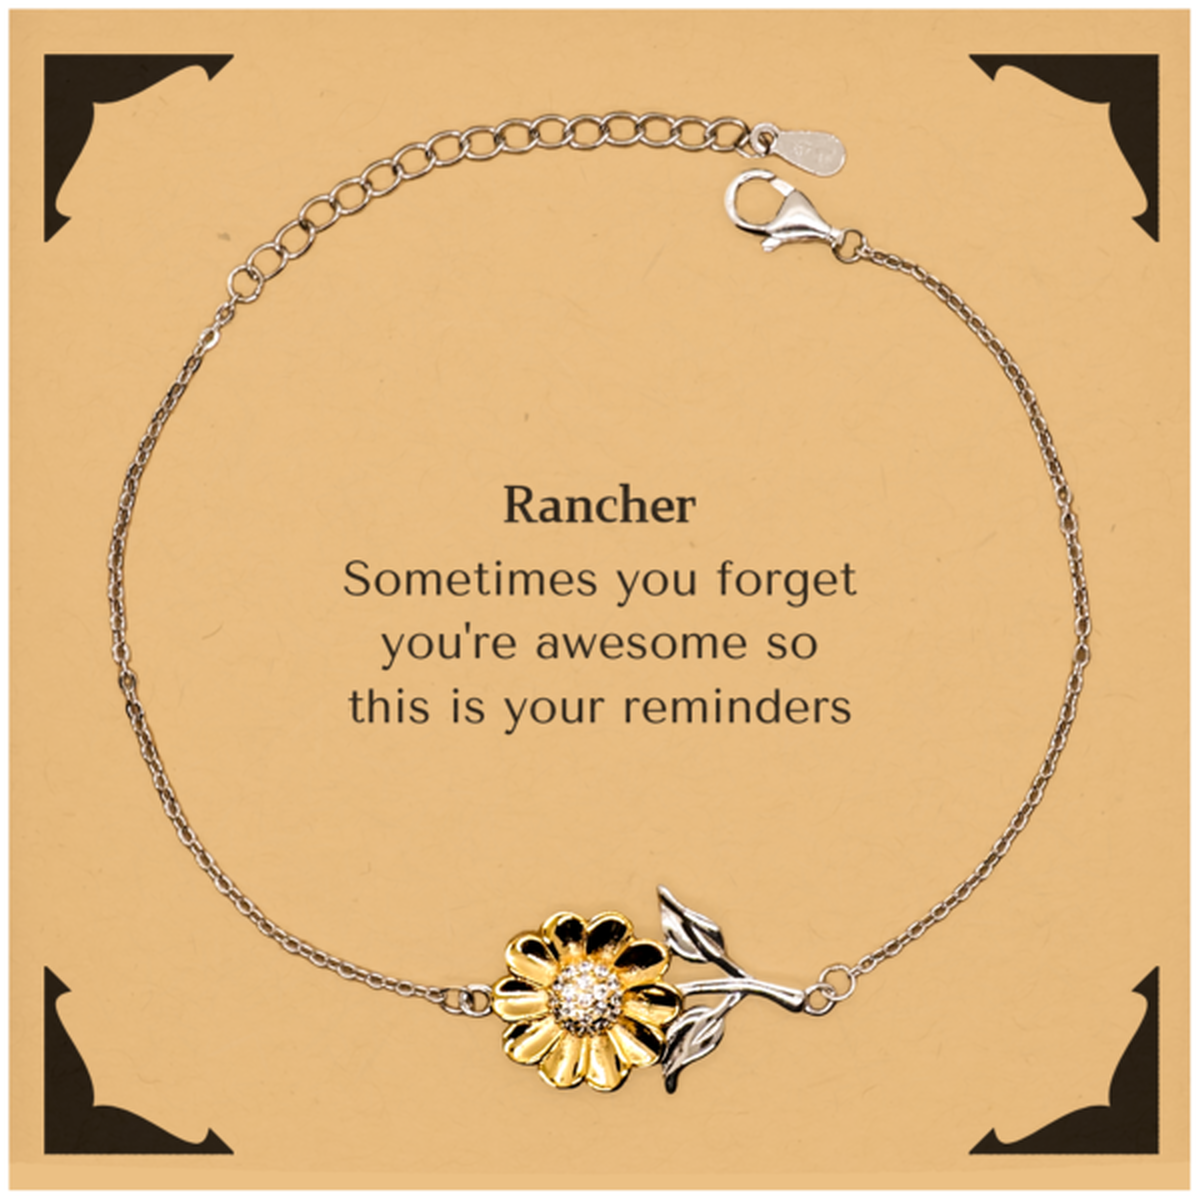 Sentimental Rancher Sunflower Bracelet, Rancher Sometimes you forget you're awesome so this is your reminders, Graduation Christmas Birthday Gifts for Rancher, Men, Women, Coworkers